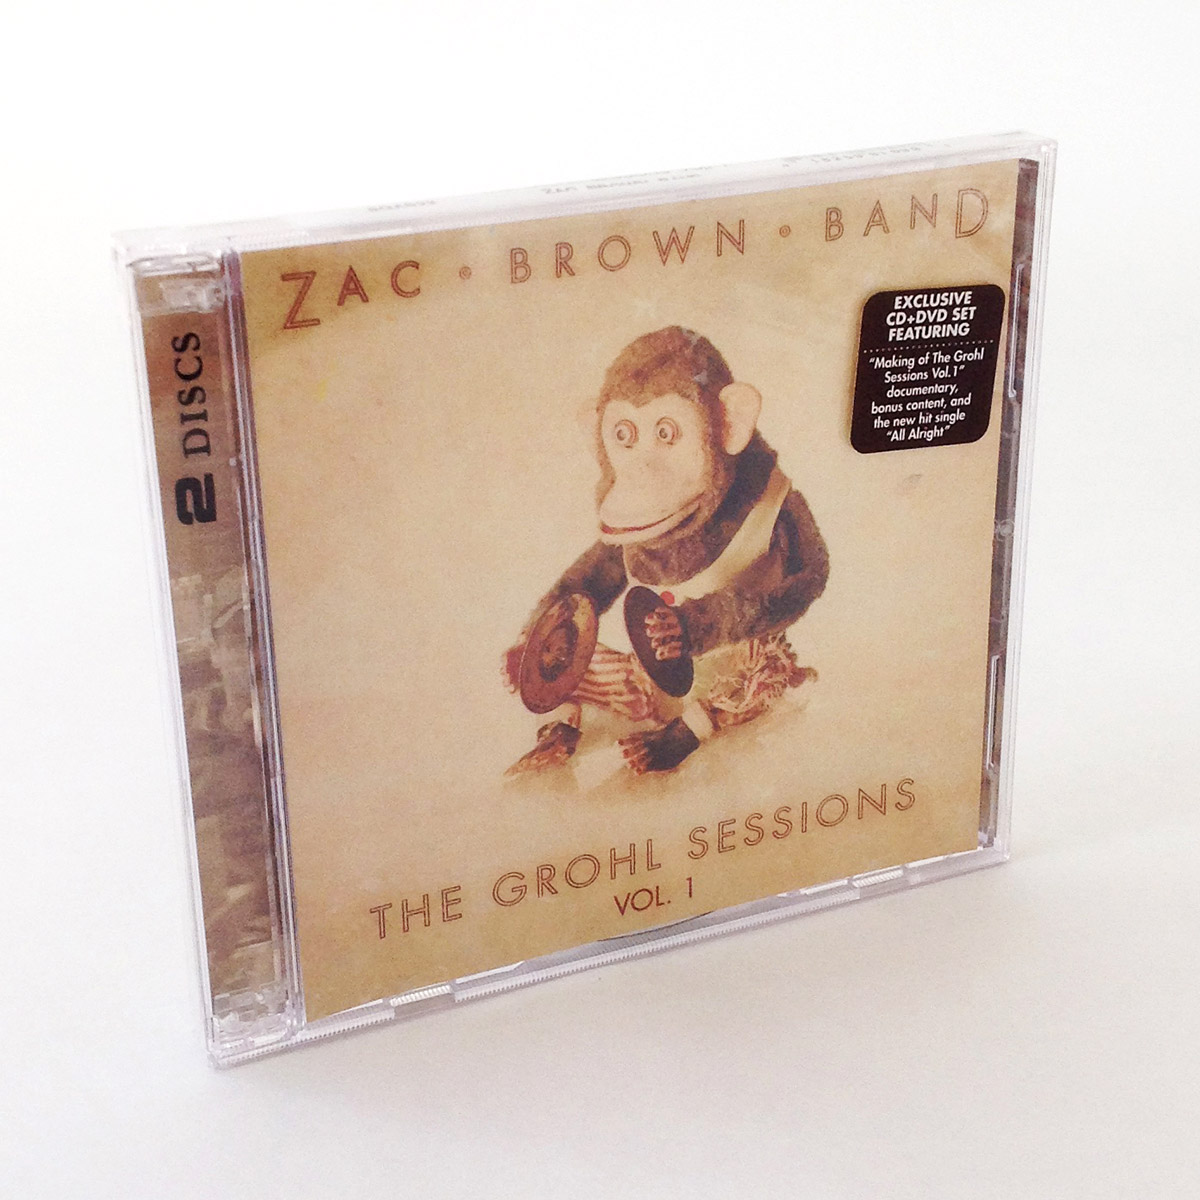 Zac Brown Band - Best CD / Compact Disc Replication